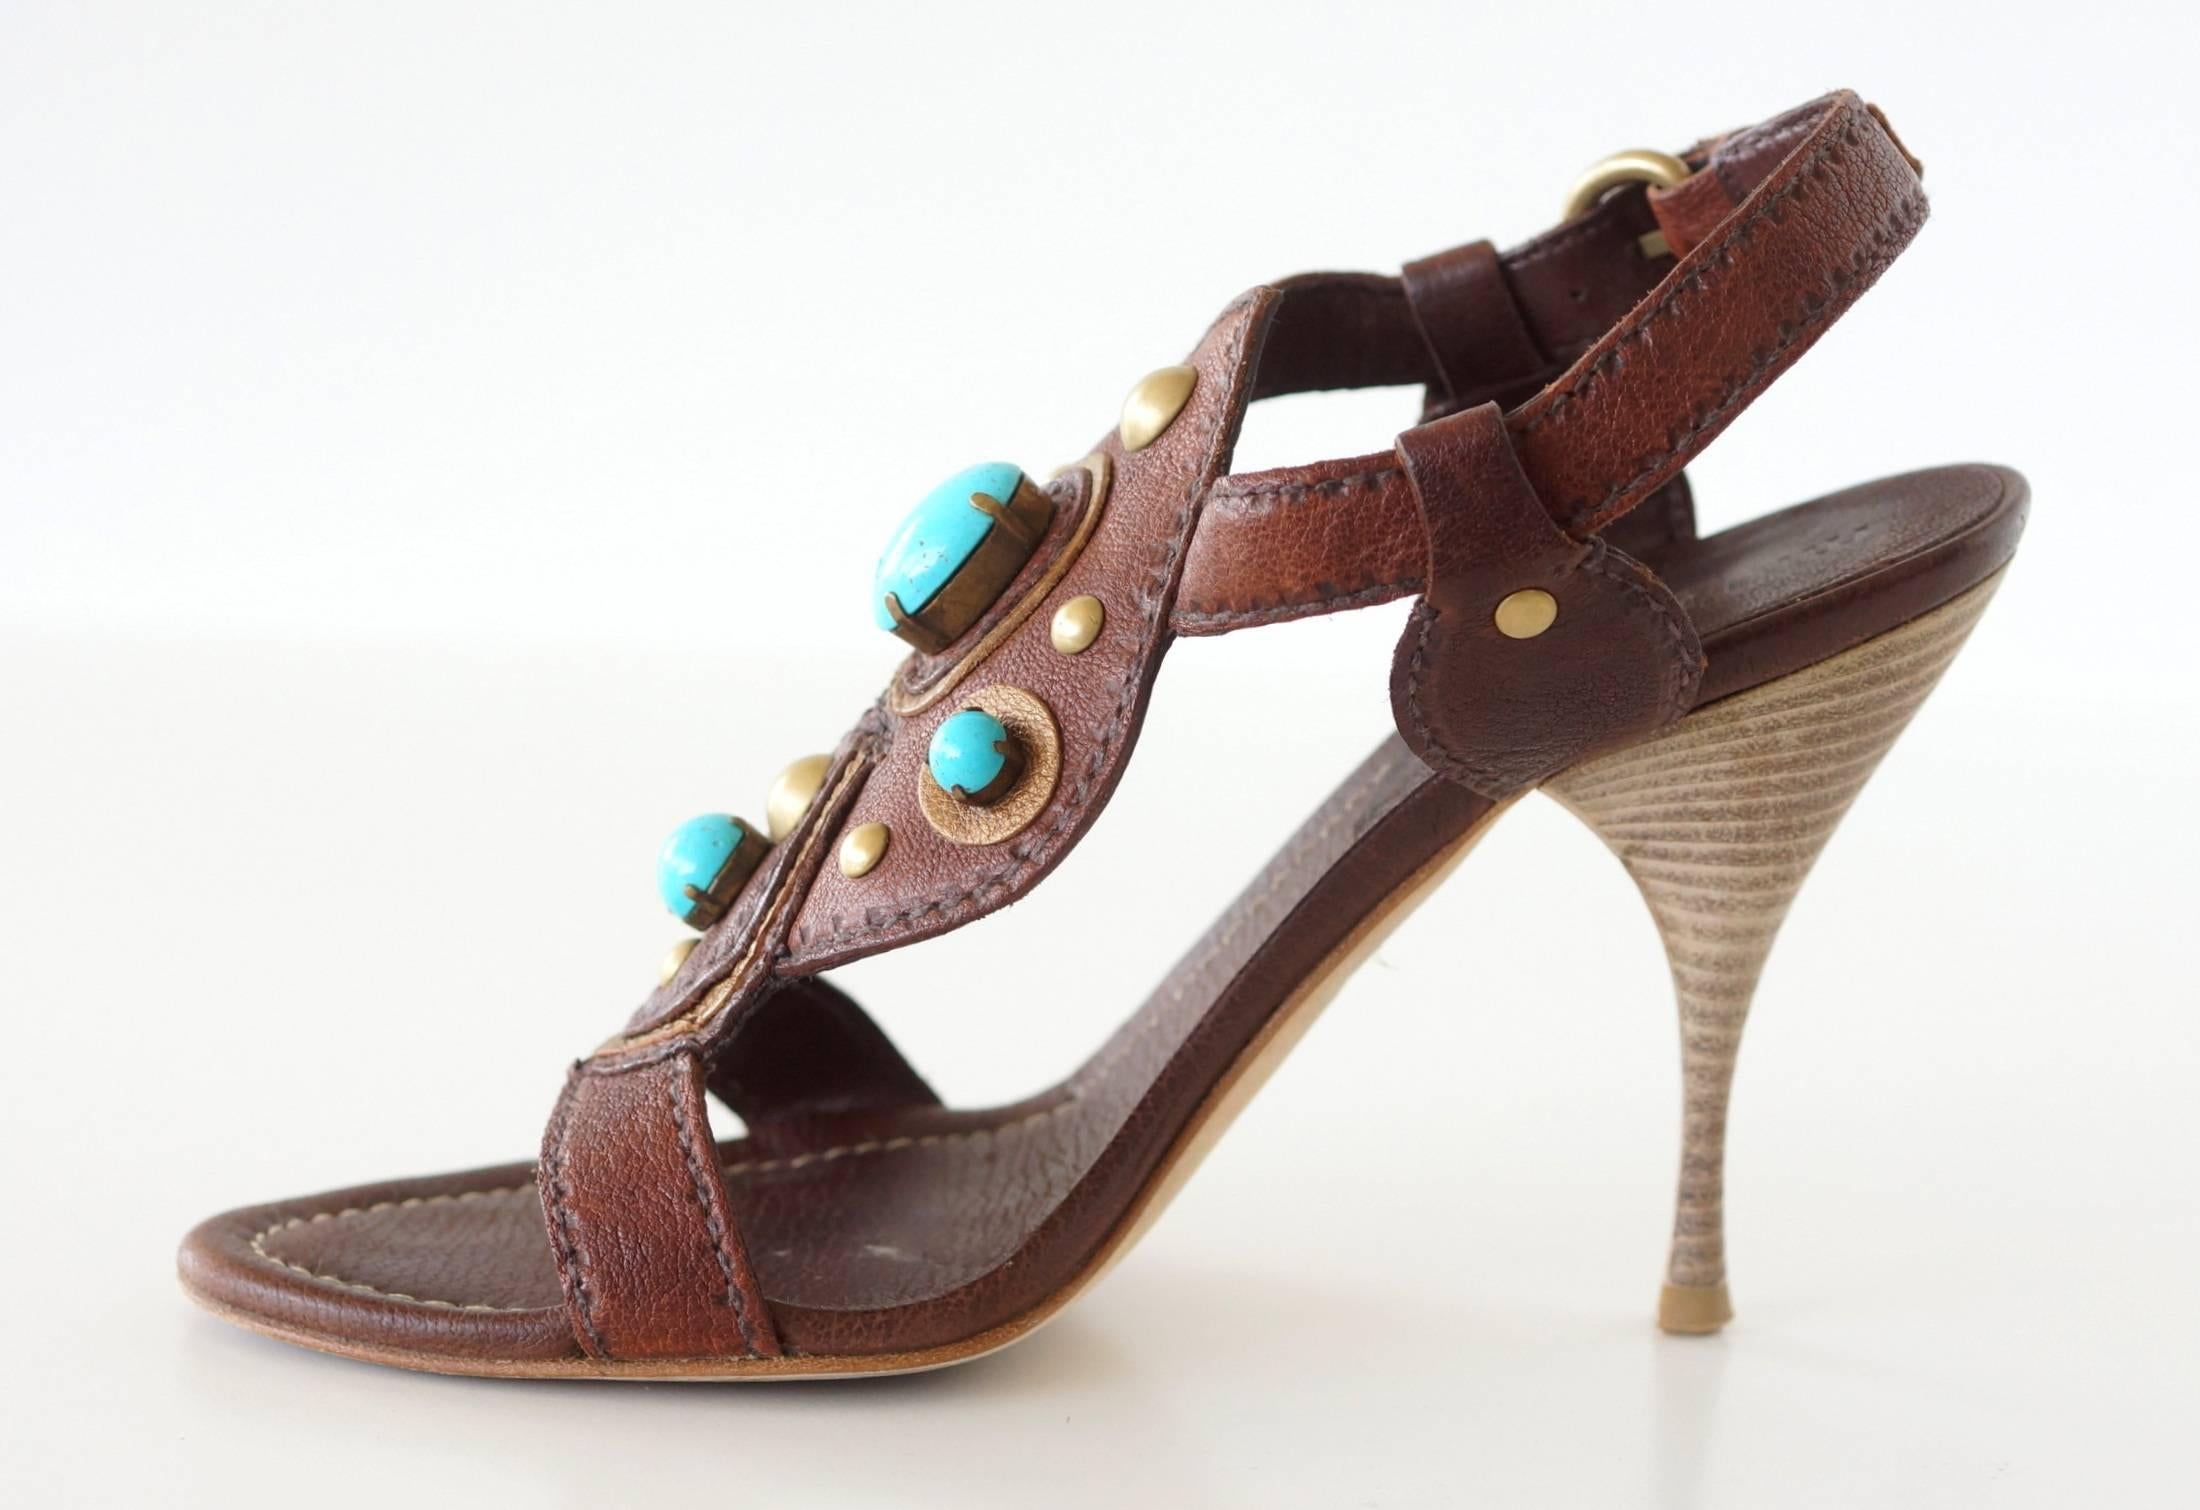 sandals with turquoise stones